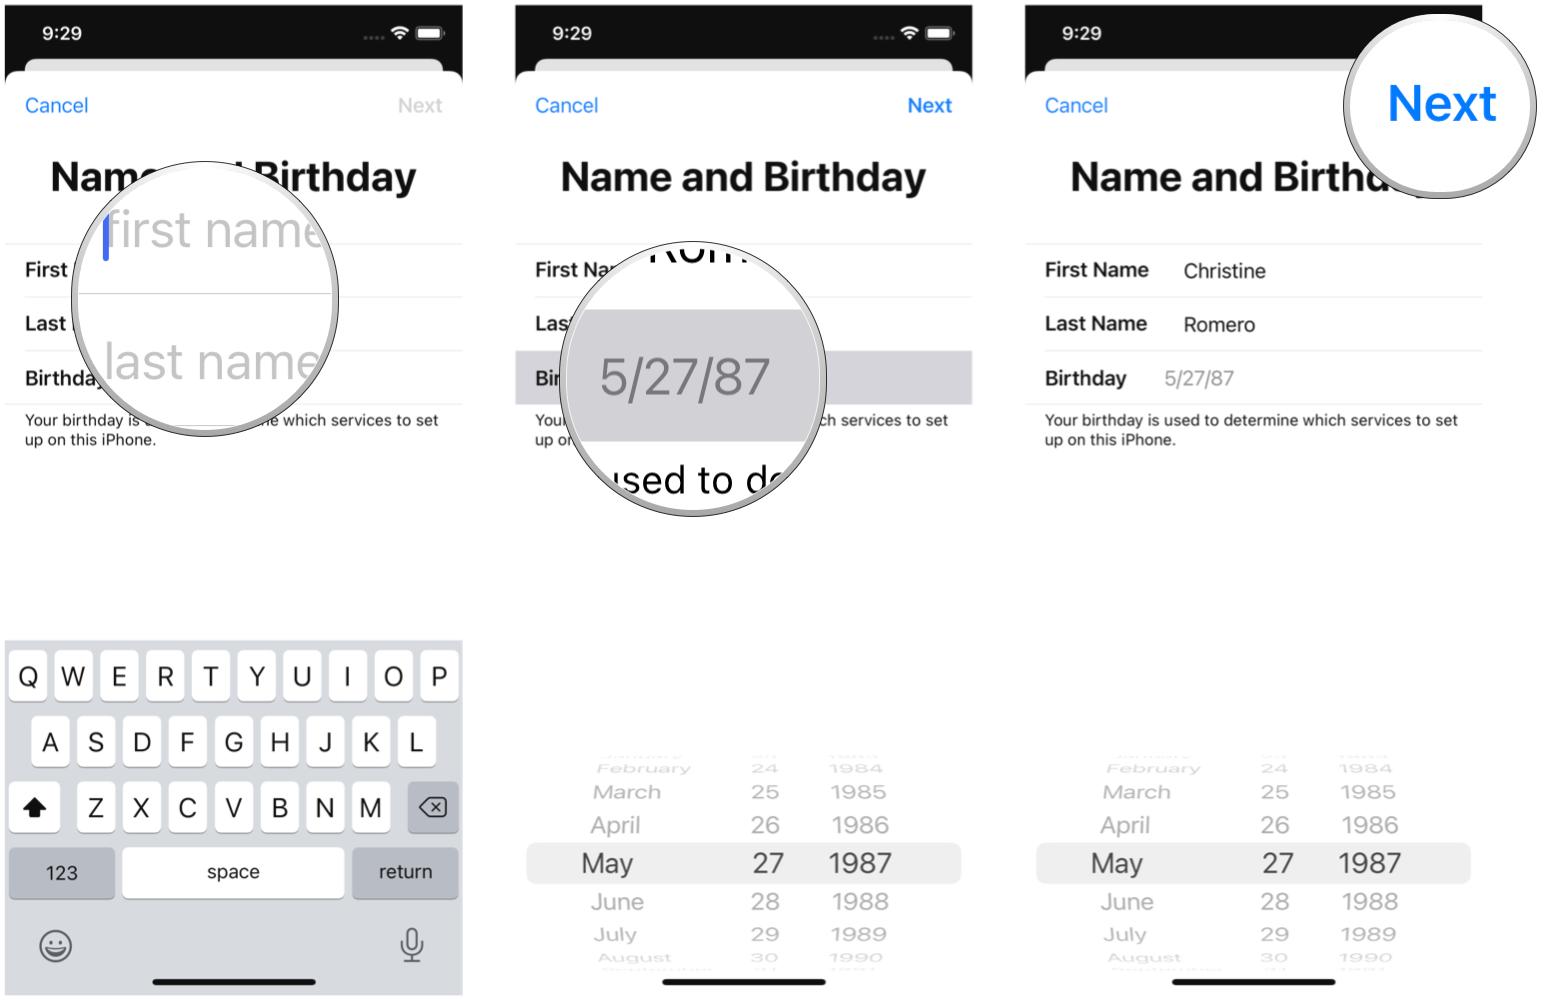 Create a new Apple ID on iPhone by showing: Enter your first and last name, then select your birthday, then tap Next